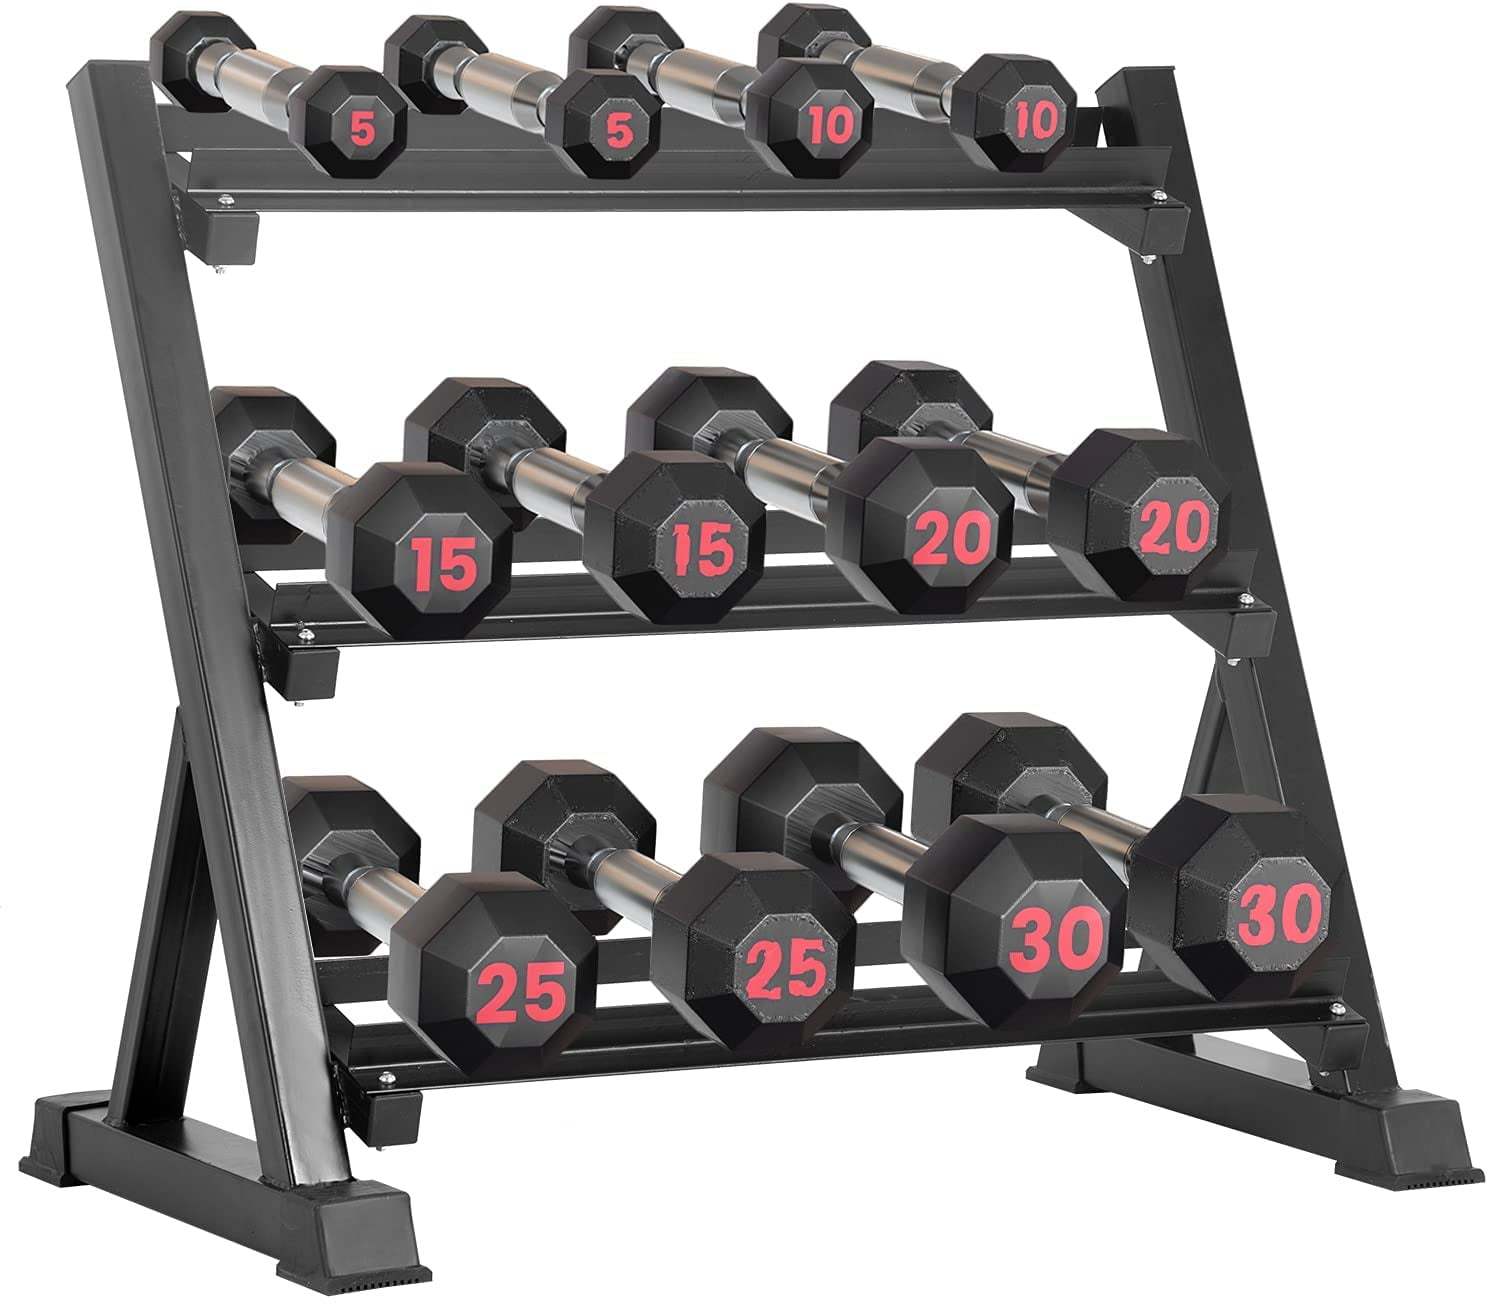 Dumbbell Rack Stand Rack Weights Dumbbells Rack 3 Tier Weight Rack for Dumbbells Weight Lifting Dumbbell,Compact Dumbbell Bracket Free Weight Stand for Home Dumbbell Stands Home Workout 